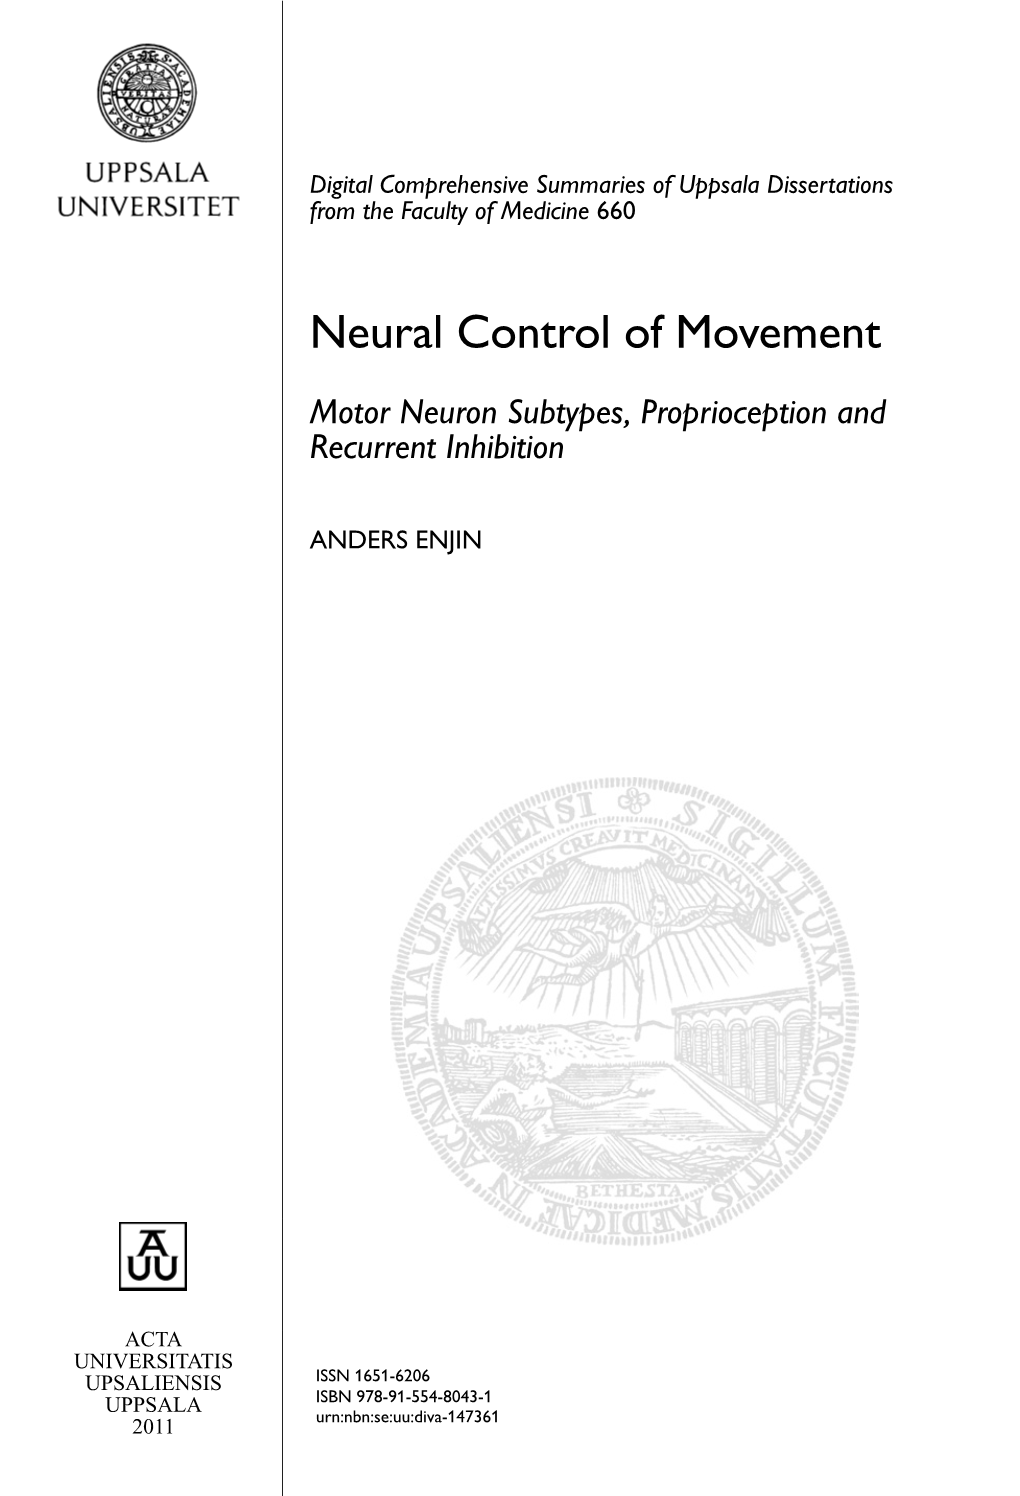 Neural Control of Movement: Motor Neuron Subtypes, Proprioception and Recurrent Inhibition